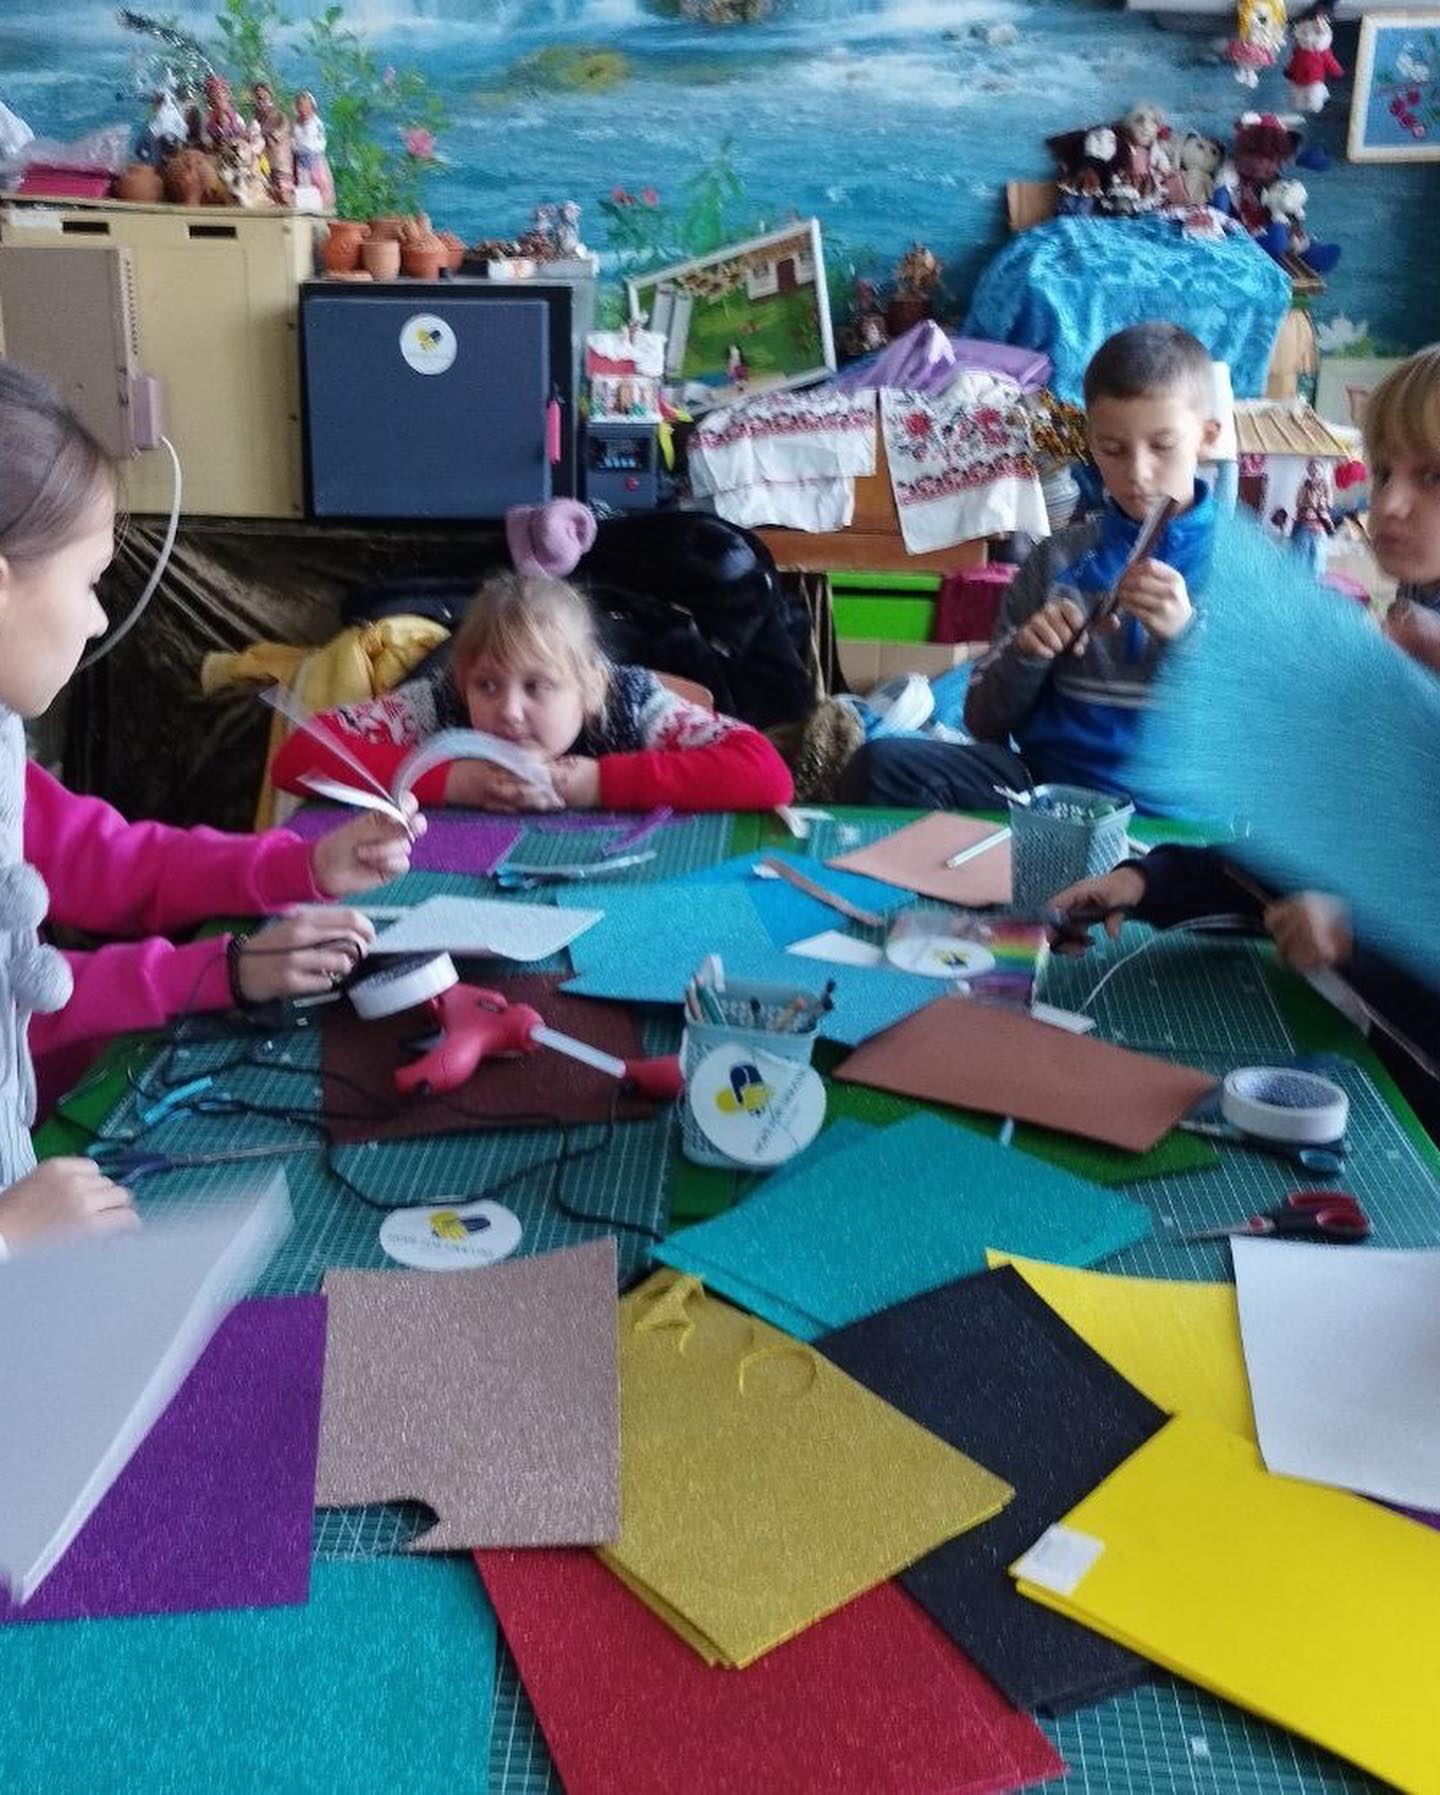 A group of children are sitting around a table making crafts.